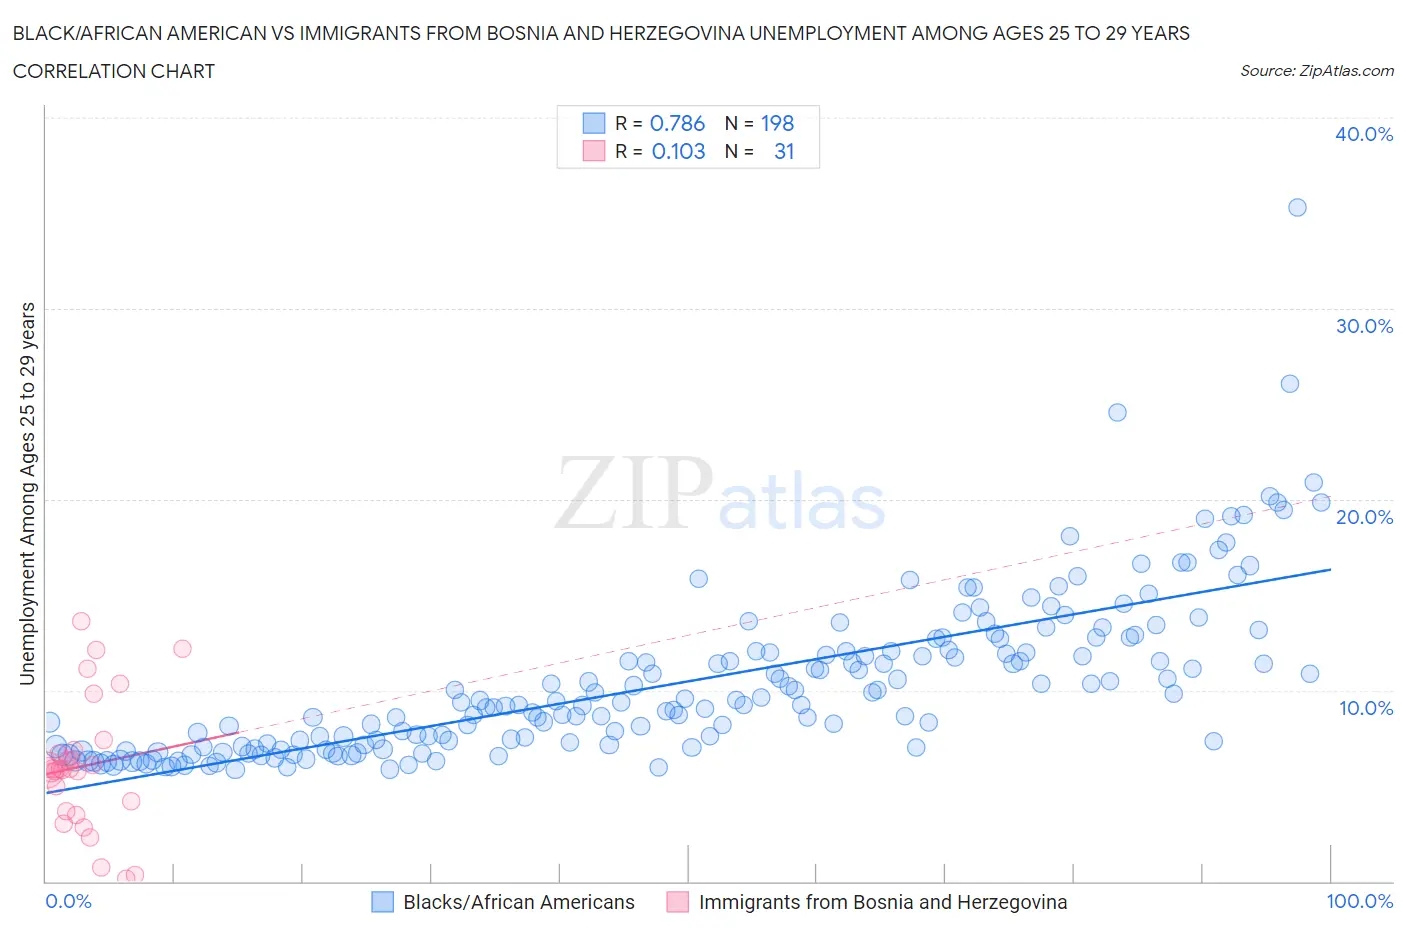 Black/African American vs Immigrants from Bosnia and Herzegovina Unemployment Among Ages 25 to 29 years